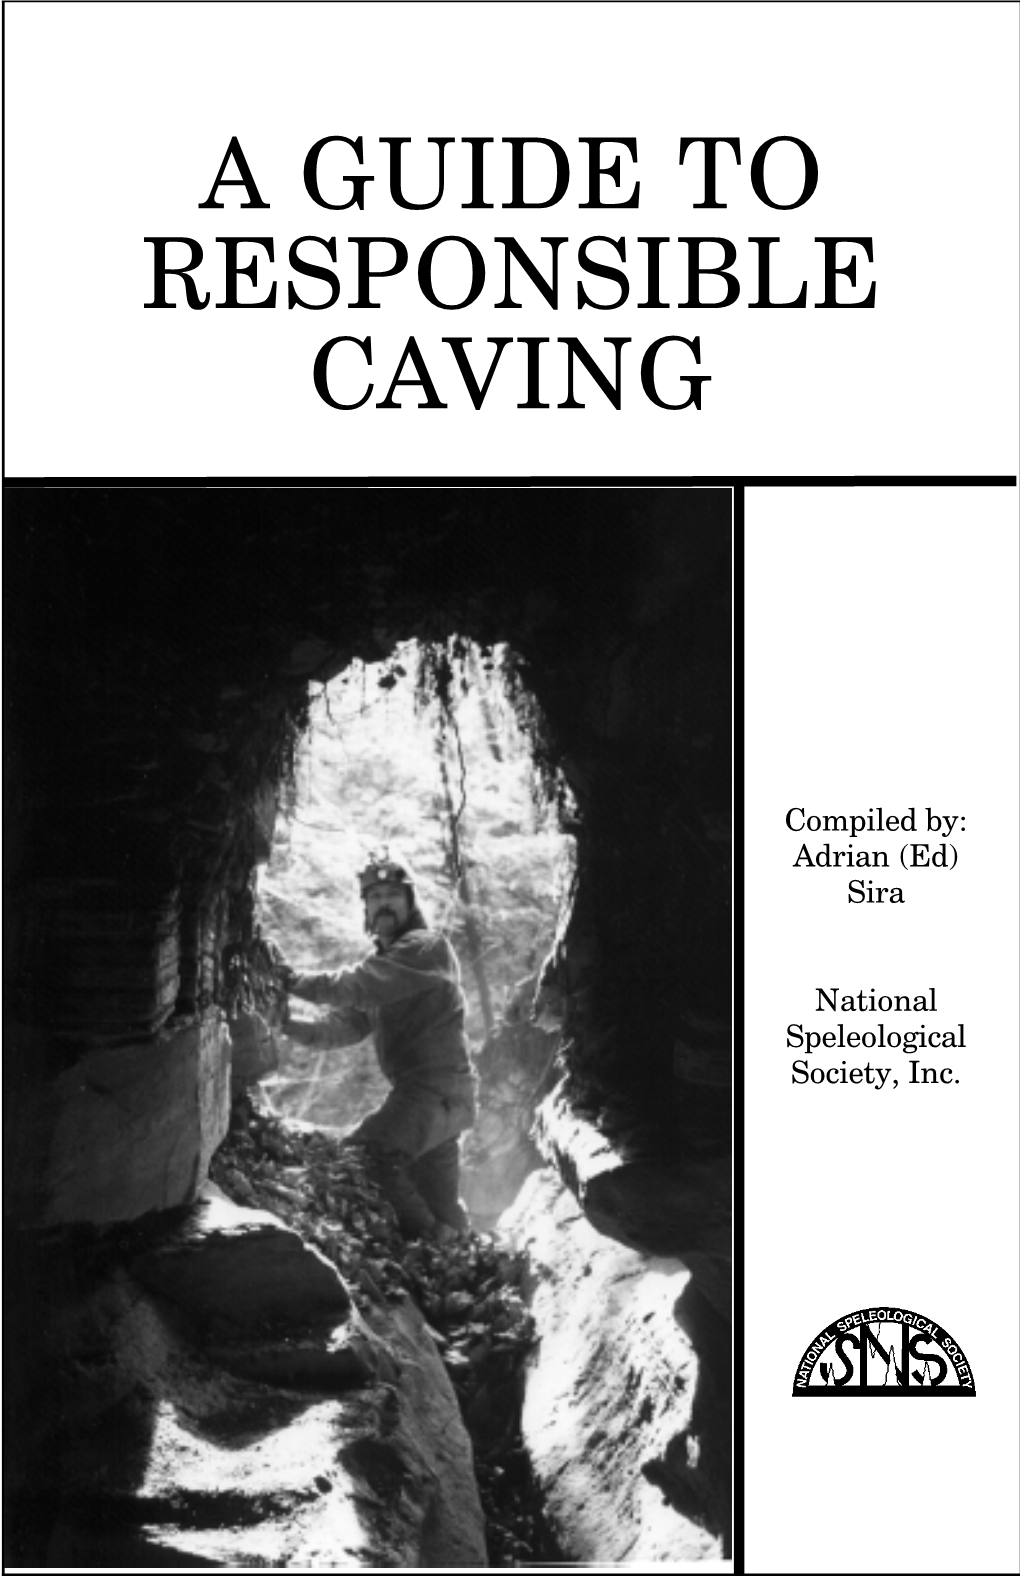 A Guide to Responsible Caving